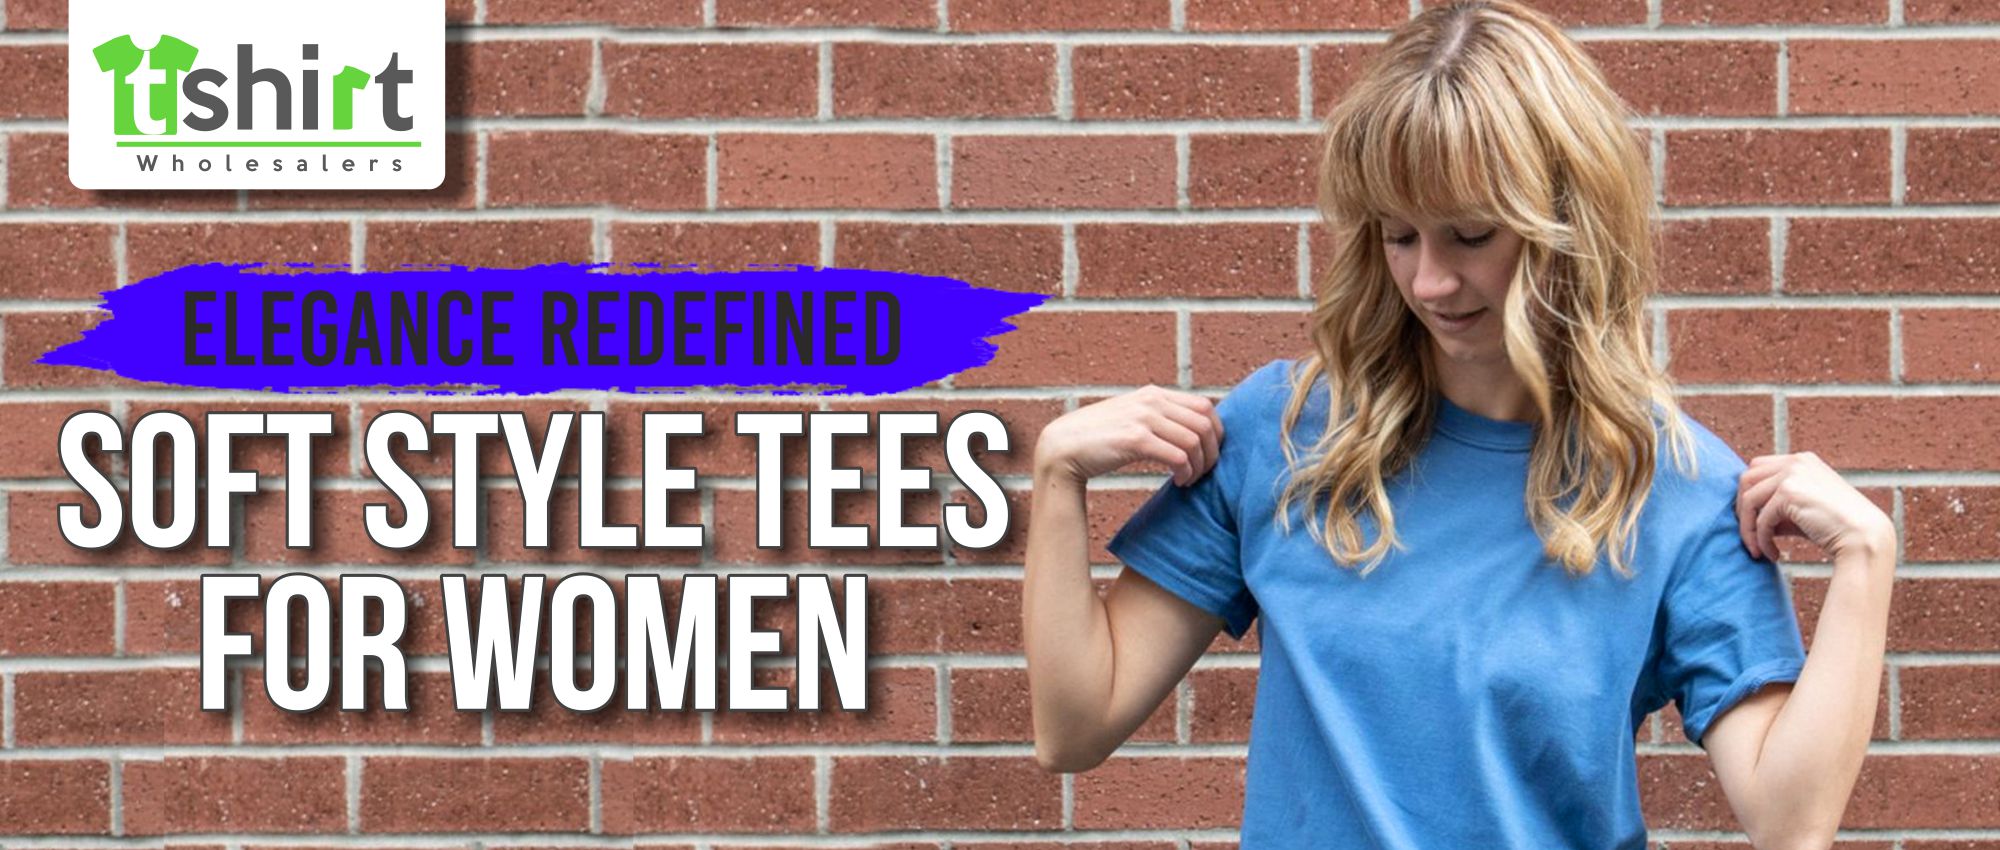 ELEGANCE REDEFINED-SOFT STYLE TEES FOR WOMEN